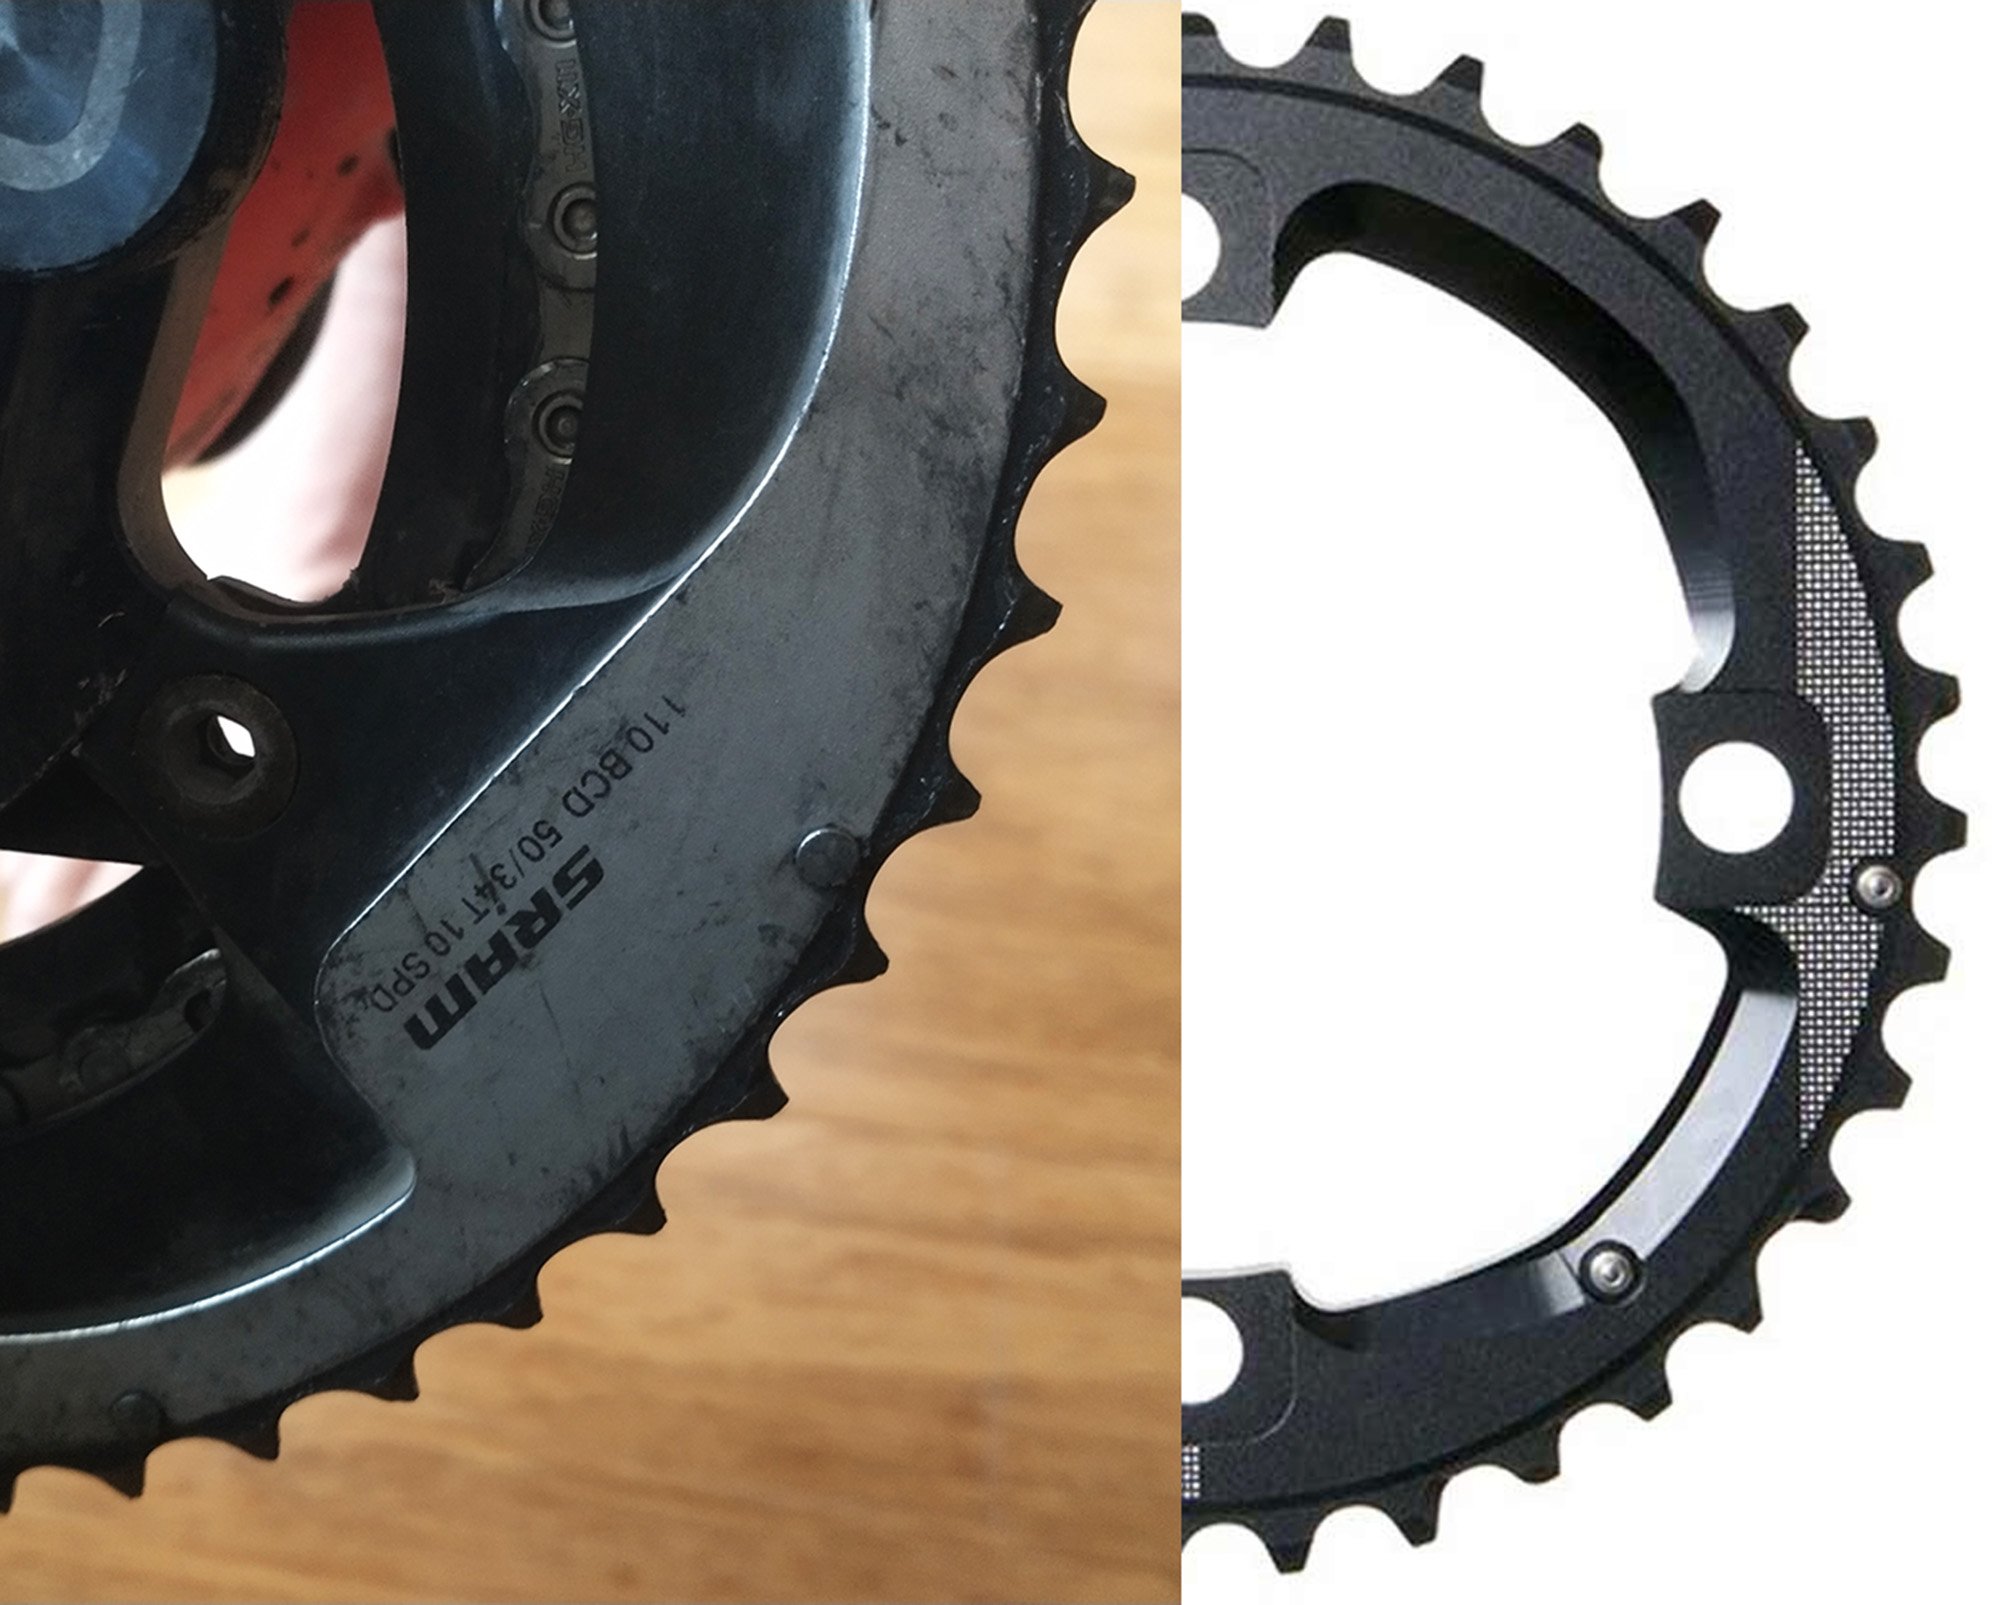 Montreal repair. That chainring was done. Look at the difference in the teeth on mine (left) and a new one. 